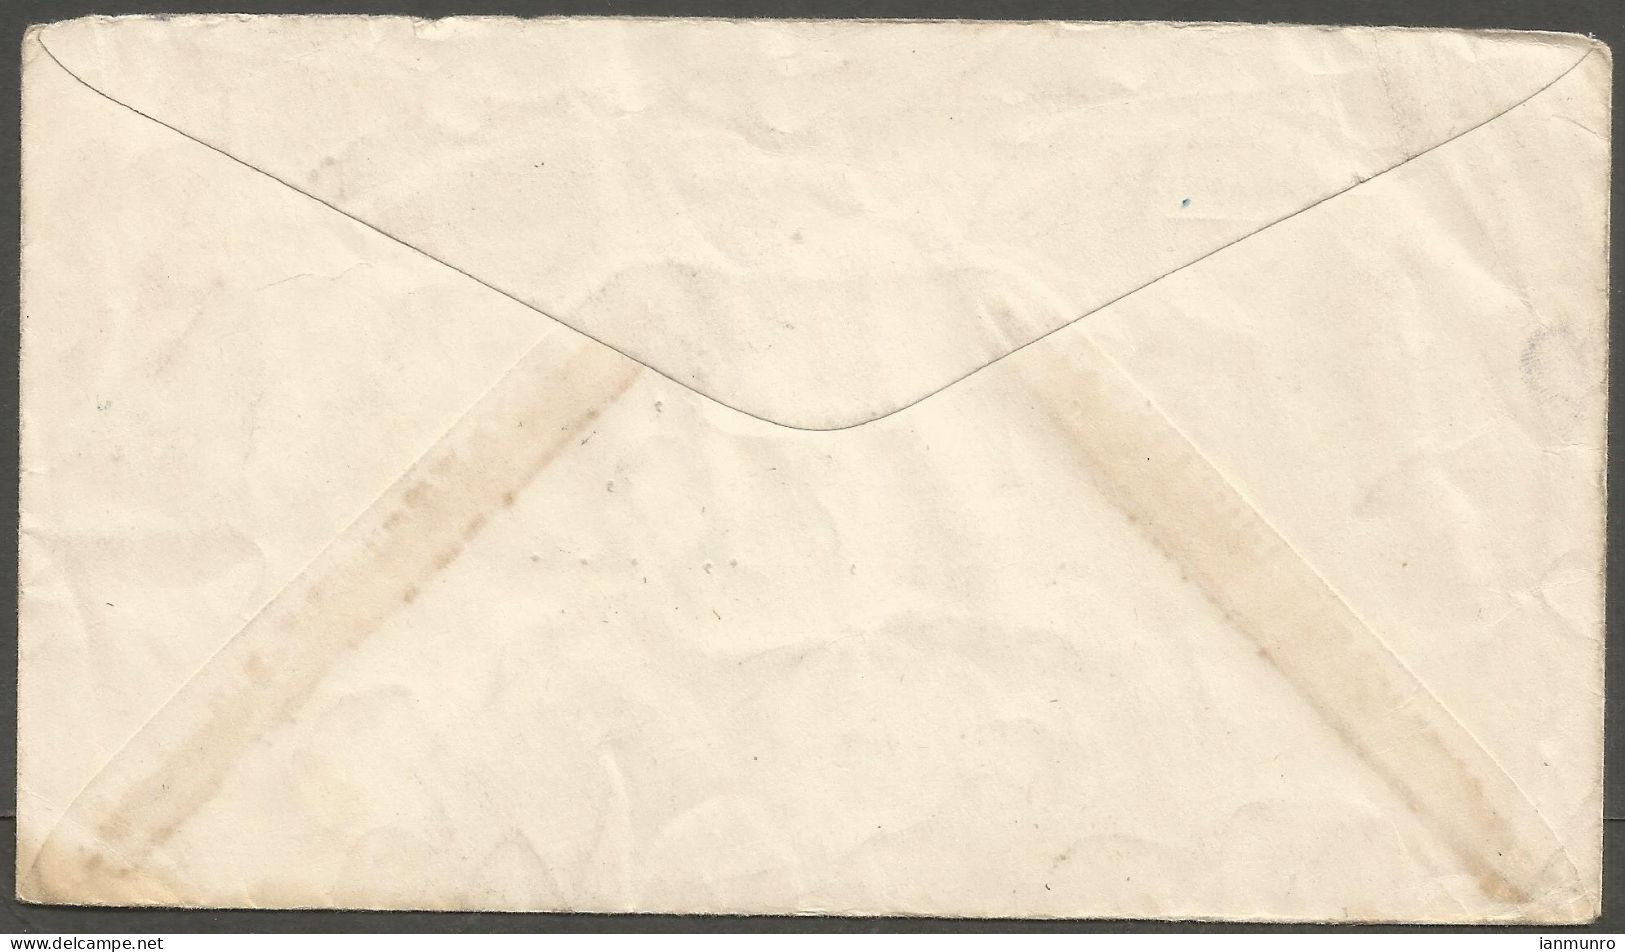 1932 Broom - Balais Company Corner Card Cover 6c Arch CDS Montmagny Quebec Airmail To USA - Postal History